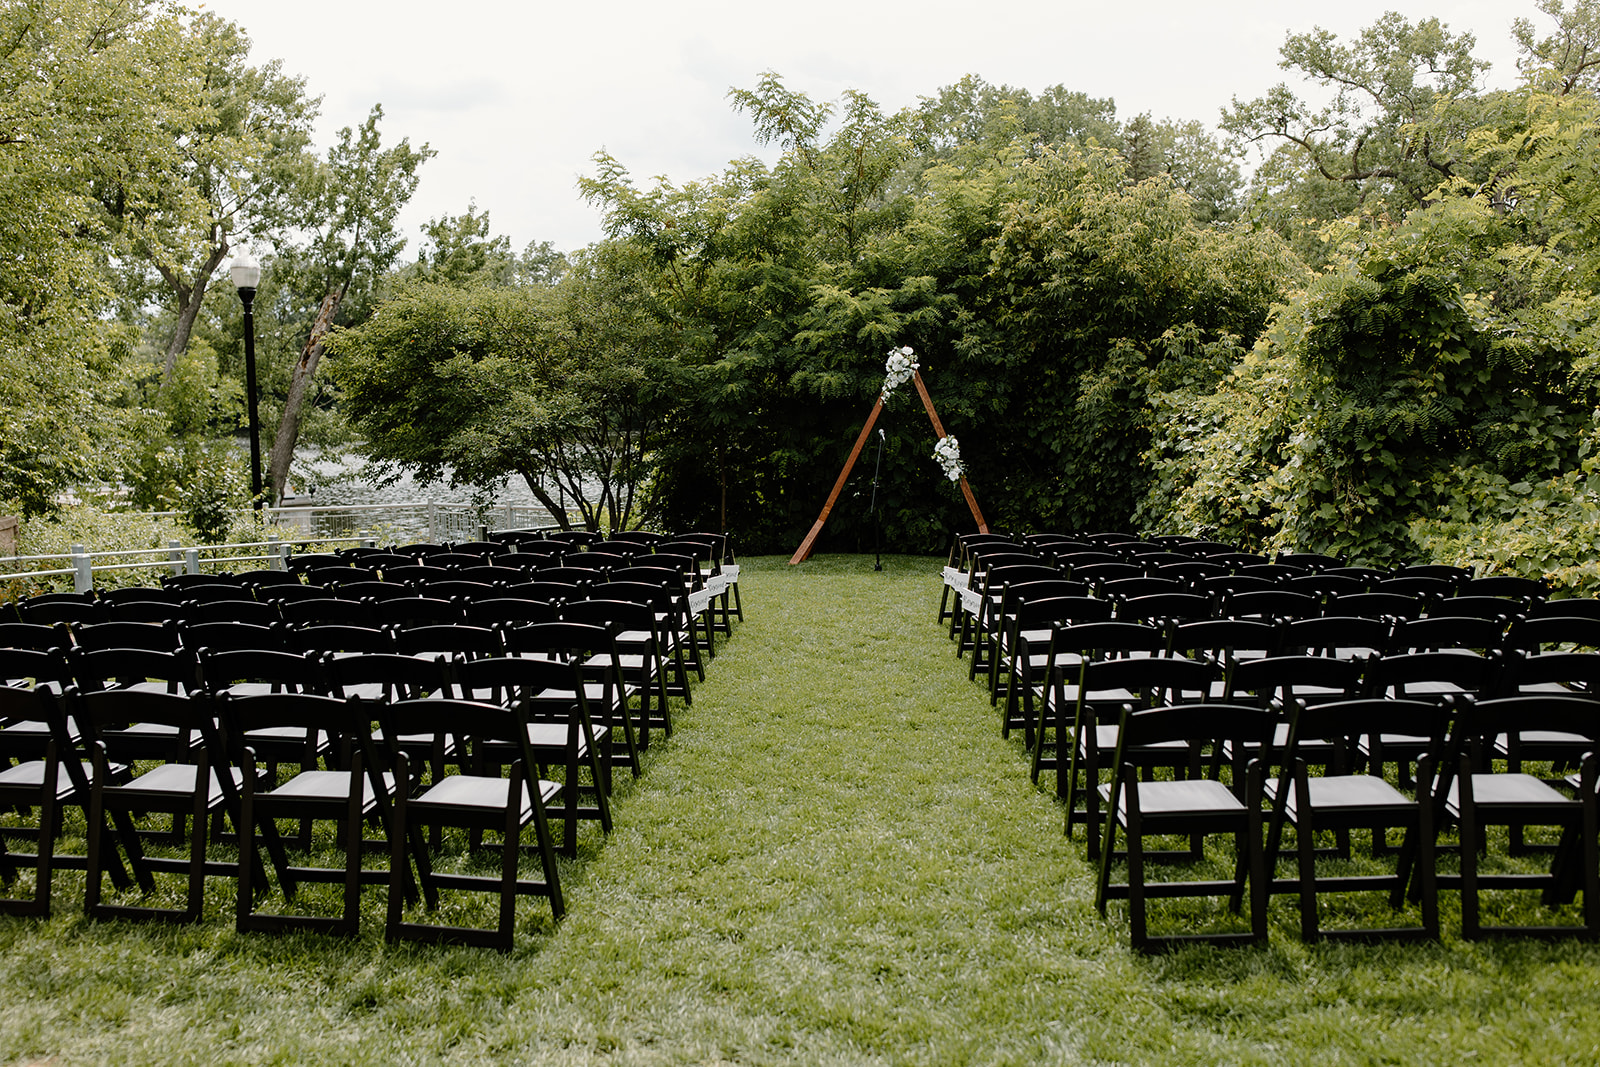 Chairs and an arch set up for a wedding ceremony in front of trees